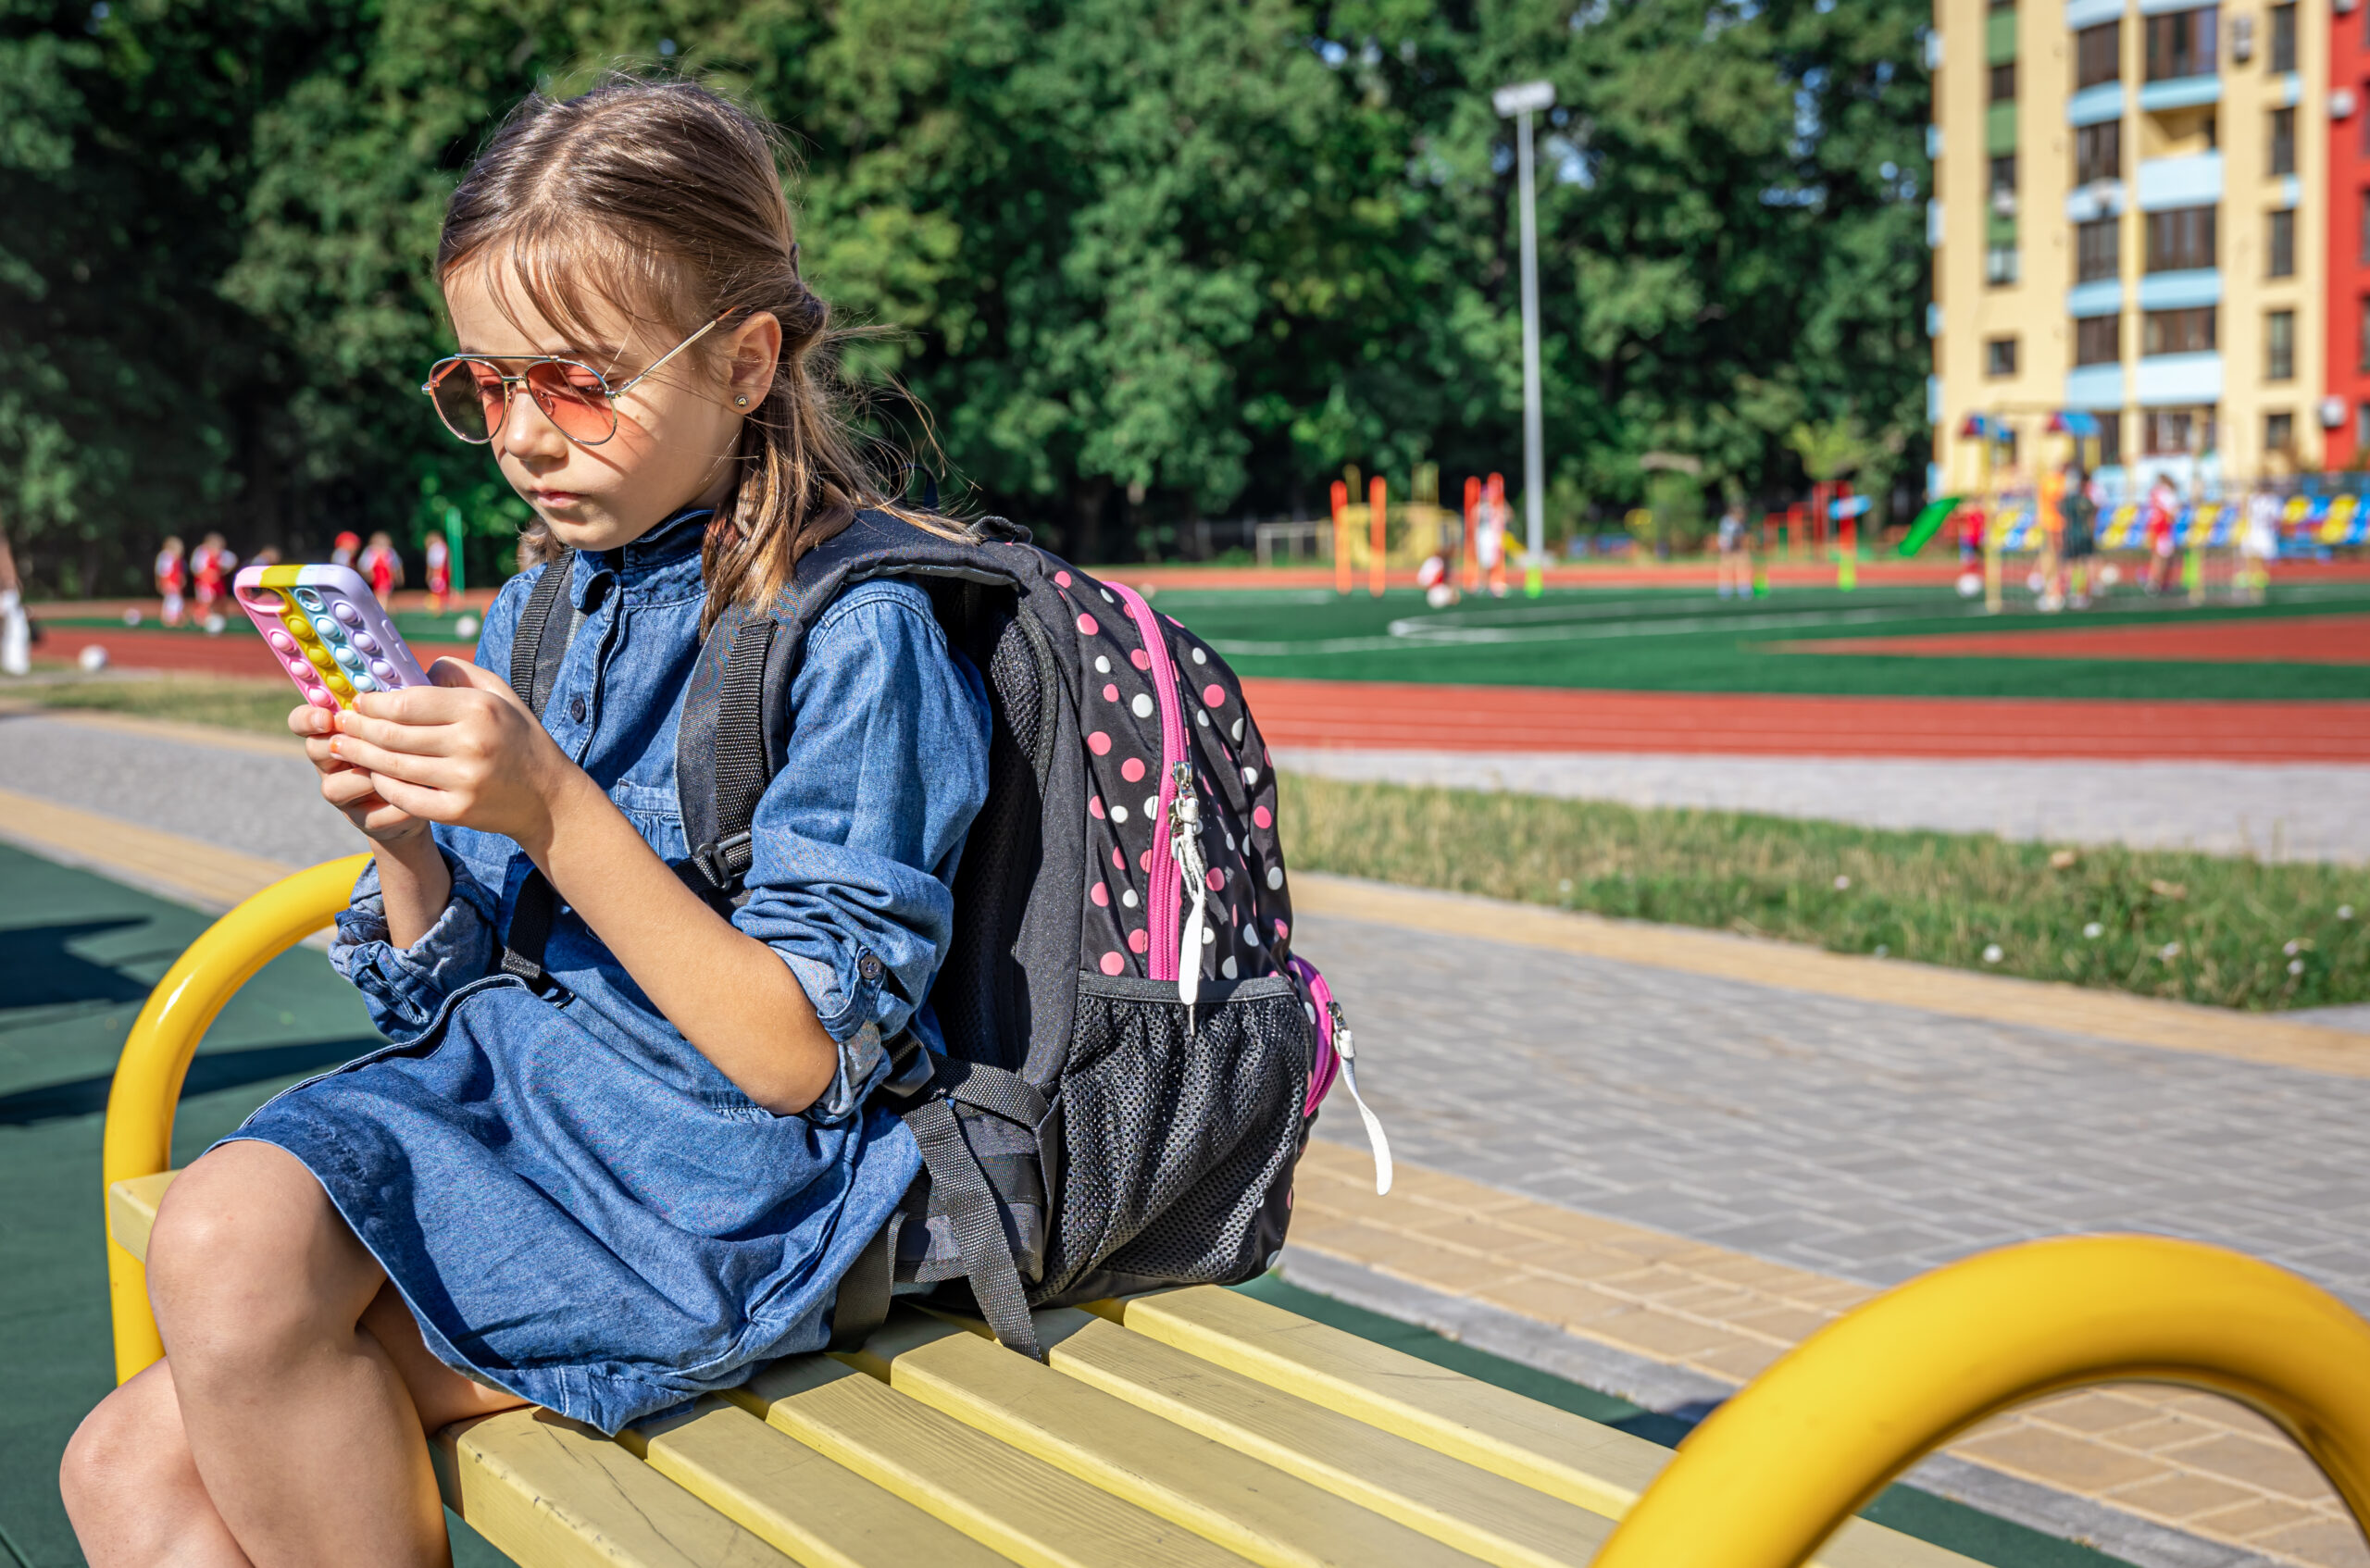 A Primary School Student With A Backpack Uses A Smartphone Sitting Near The School Scaled